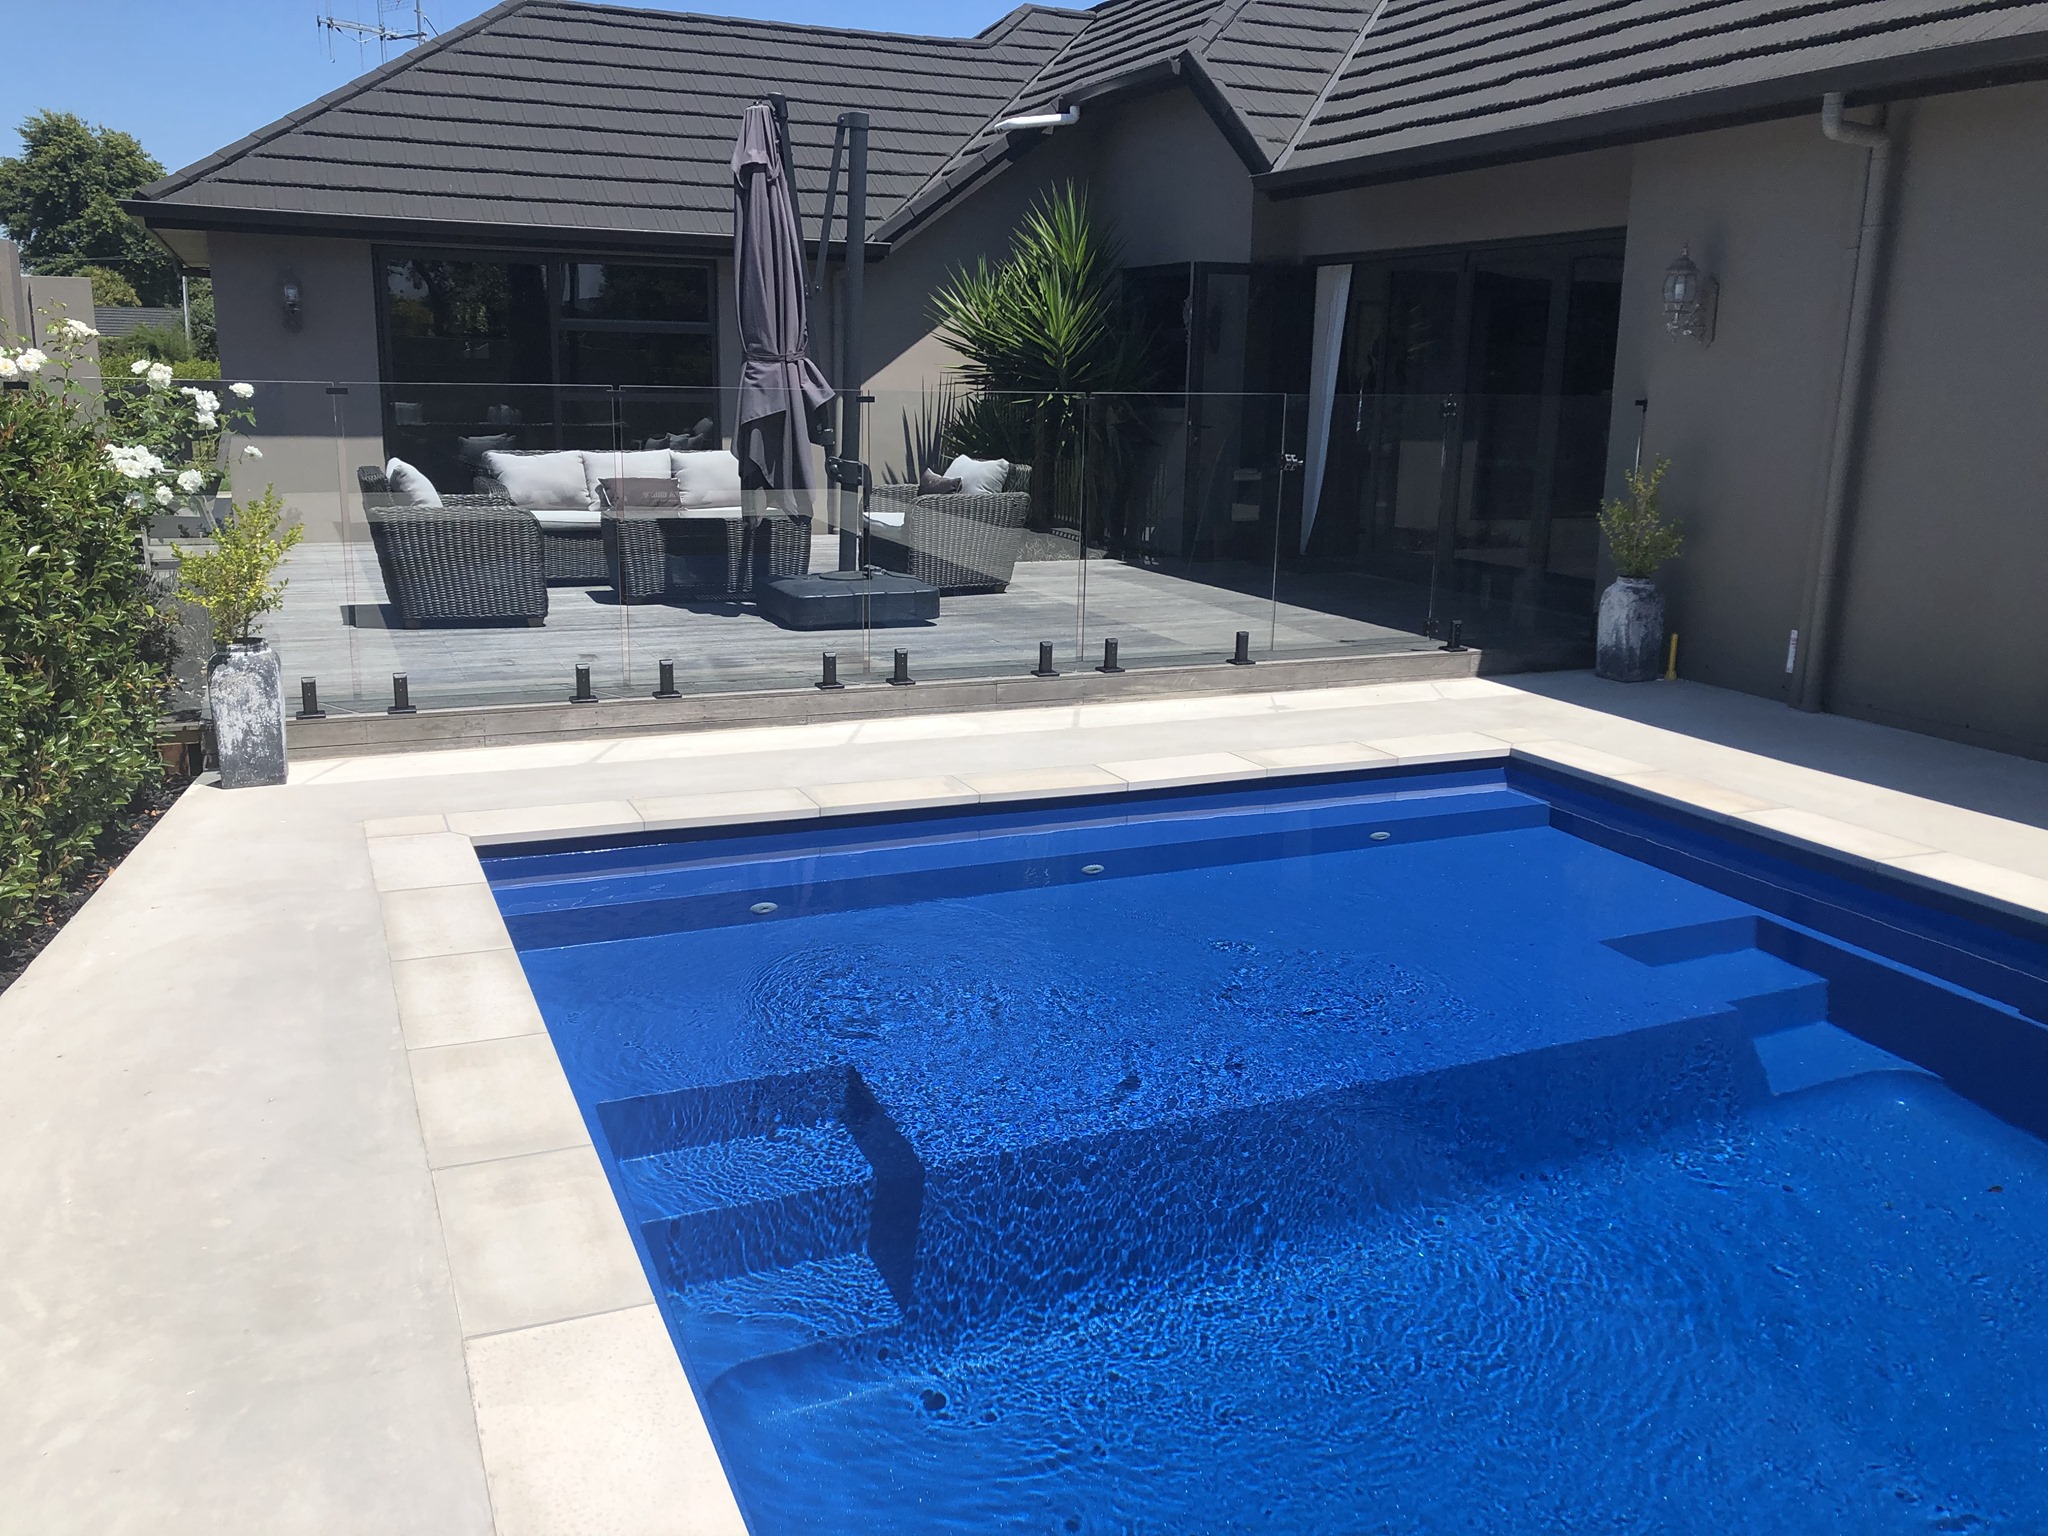 The Acclaim from the Leisure Pools range features a splash deck area